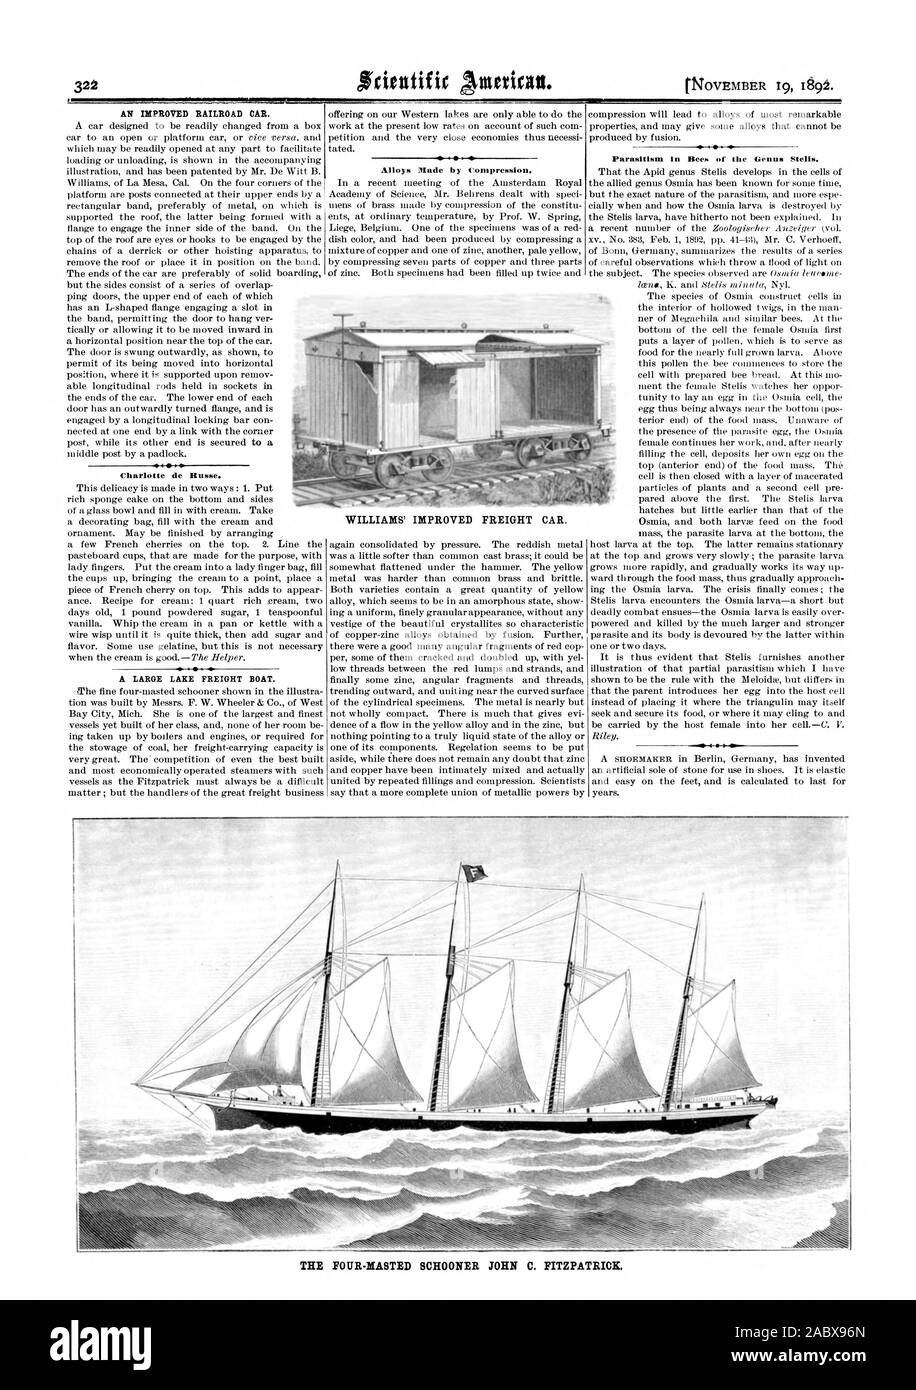 Charlotte de Russe. A LARGE LAKE FREIGHT BOAT. Alloys Made by Compression. WILLIAMS' IMPROVED FREIGHT CAR. Parasitism in Bees of the Genus Stelis. THE FOUR-MASTED SCHOONER JOHN C. FITZPATRICK., scientific american, 1892-11-19 Stock Photo